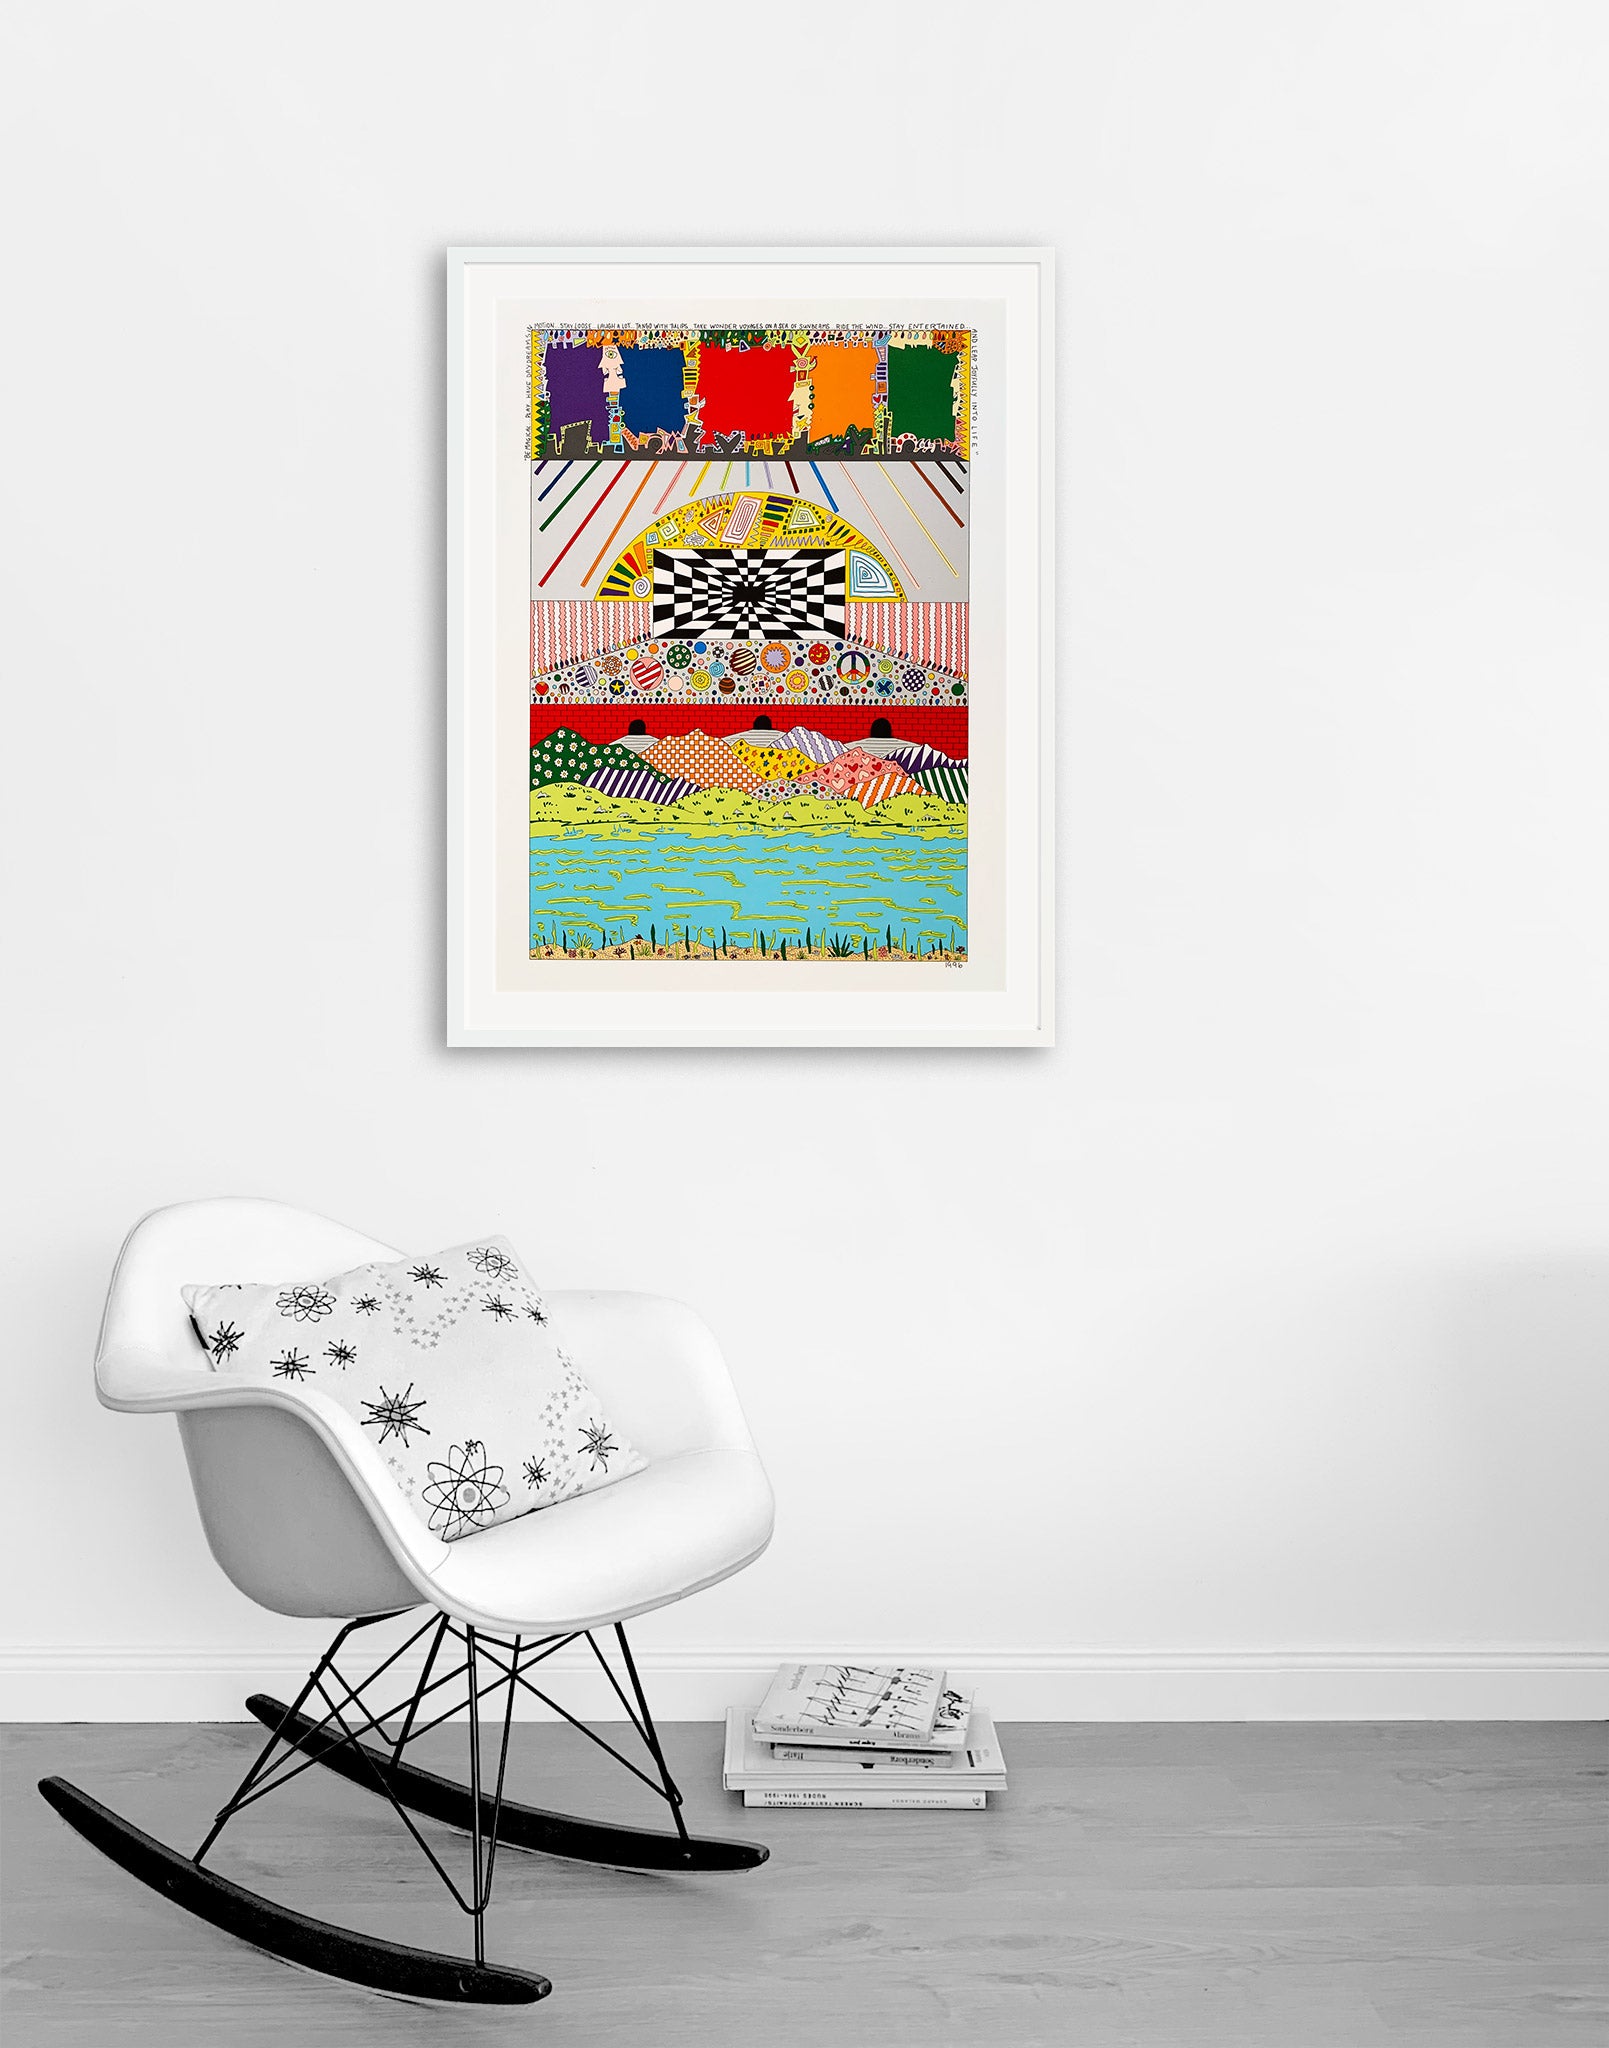 JAMES RIZZI | One-of-a-Kind | BE MAGICAL - Rizzi @ made by yourself - Artwork Set #1 | Flat-Print color lithography & The New York Paintings (german version)